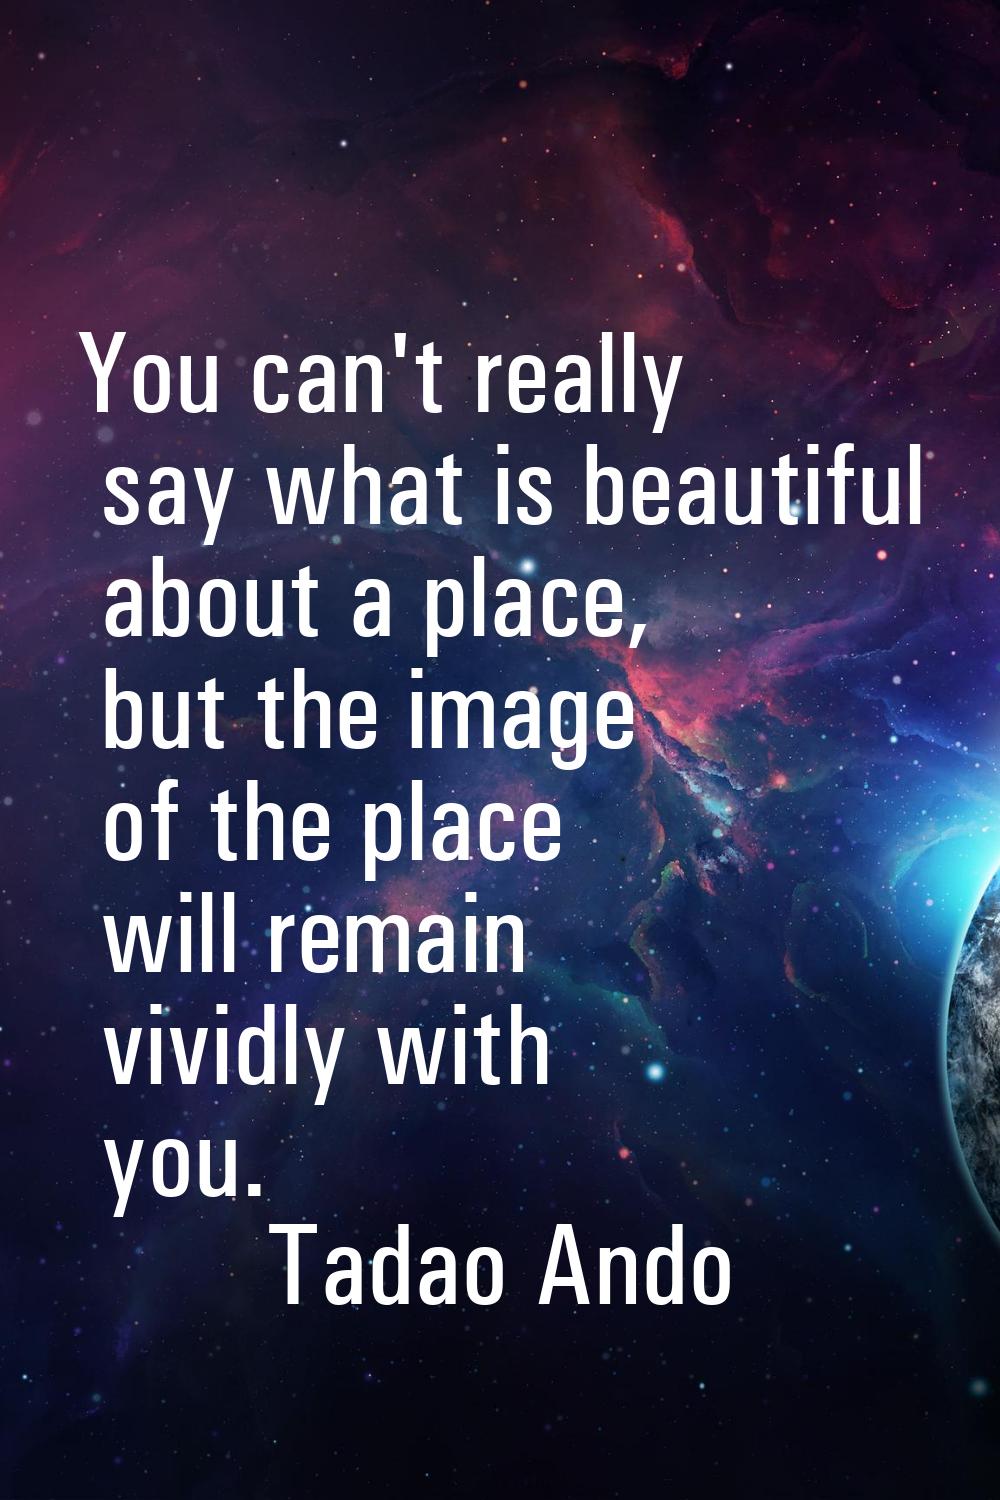 You can't really say what is beautiful about a place, but the image of the place will remain vividl